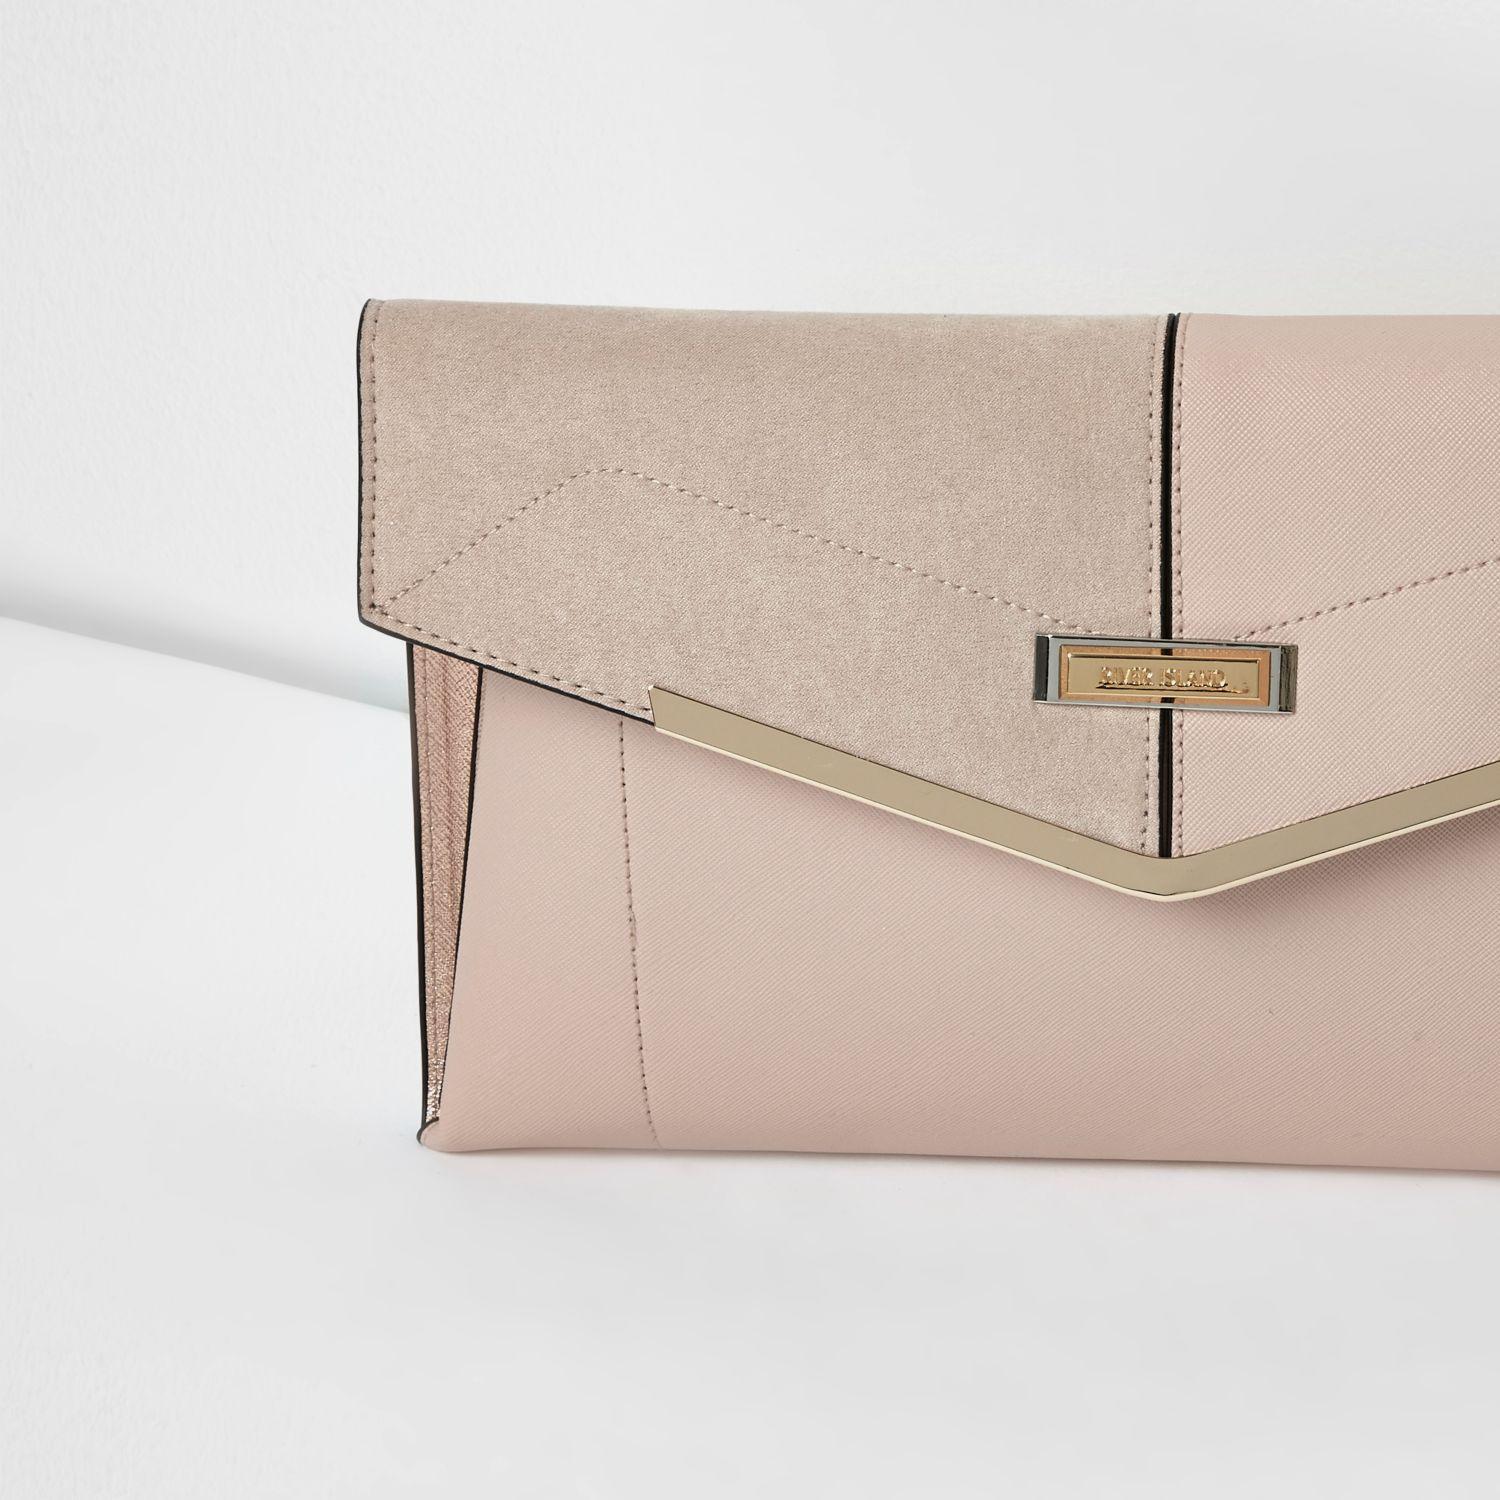 River Island Nude Envelope Clutch Bag in Natural | Lyst